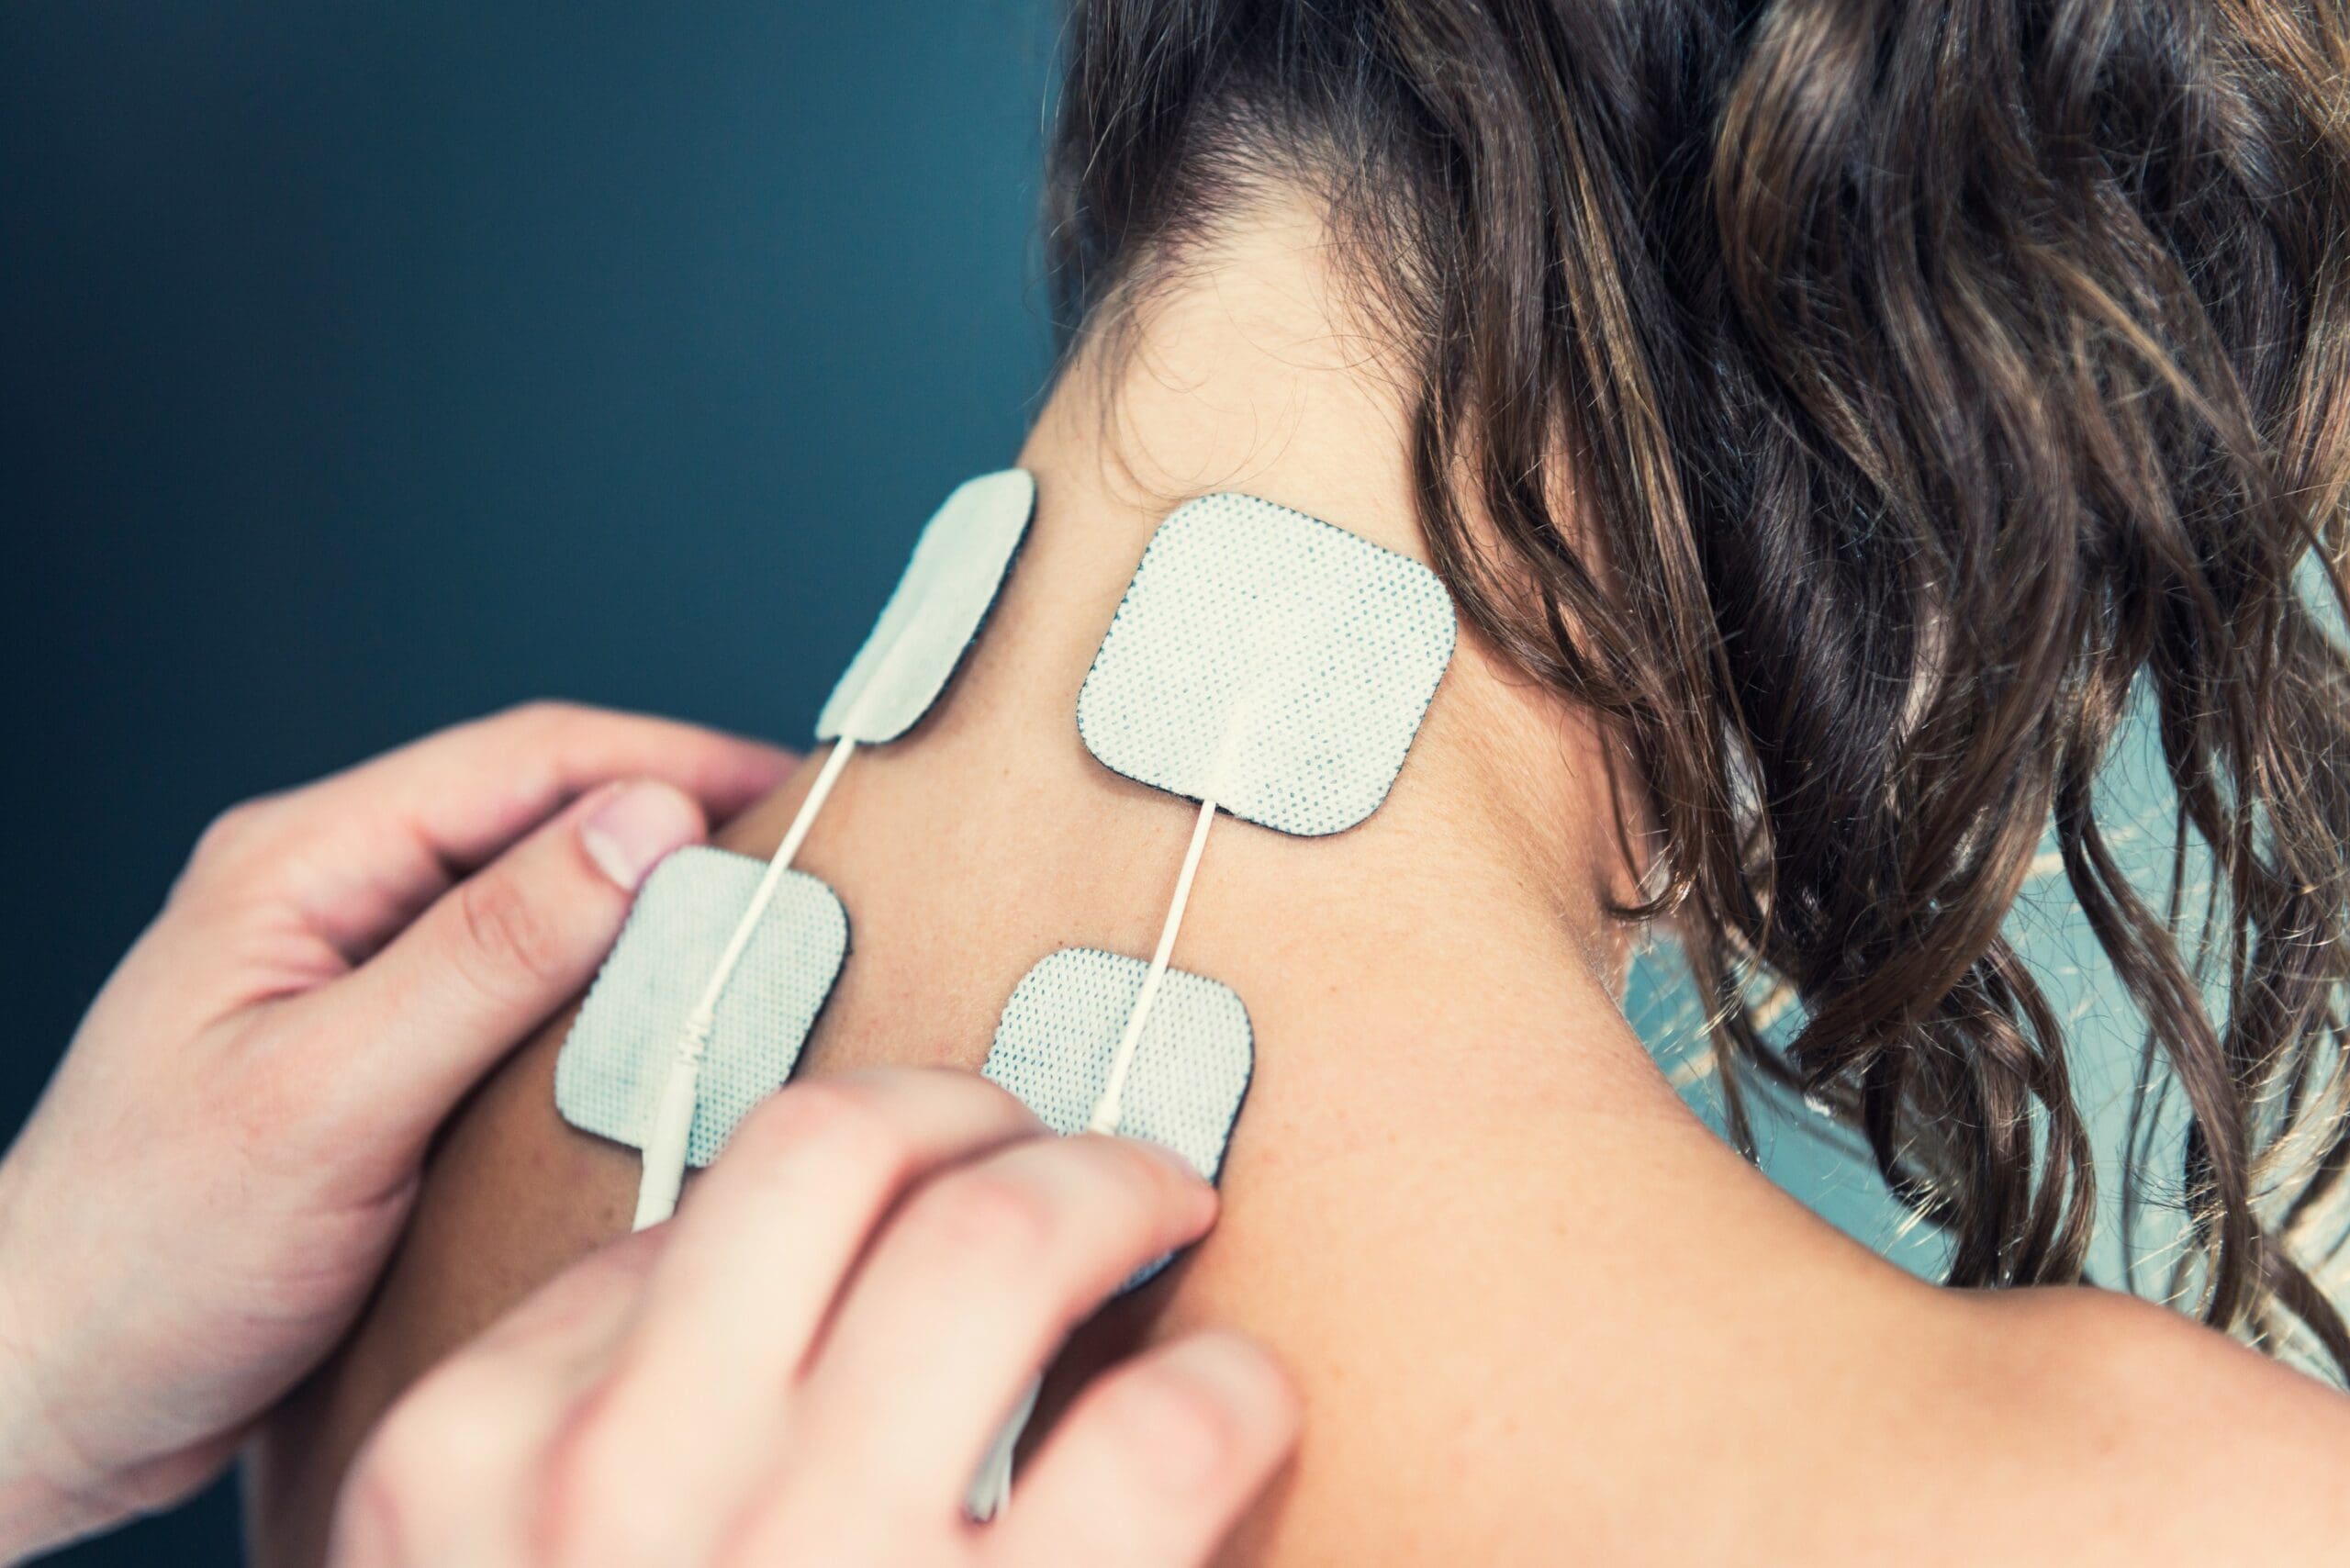 TENS – transcutaneous electrical nerve stimulation